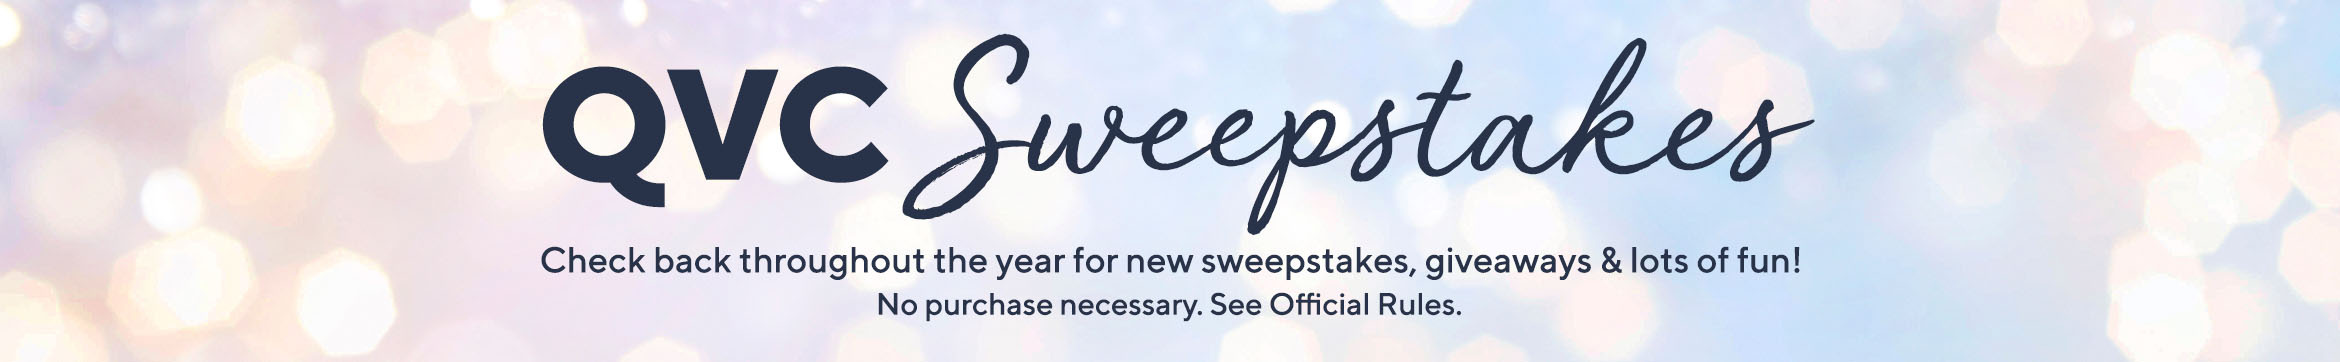 QVC Sweepstakes. Check back throughout the year for new sweepstakes, giveaways & lots of fun. No purchase necessary. See Official Rules.